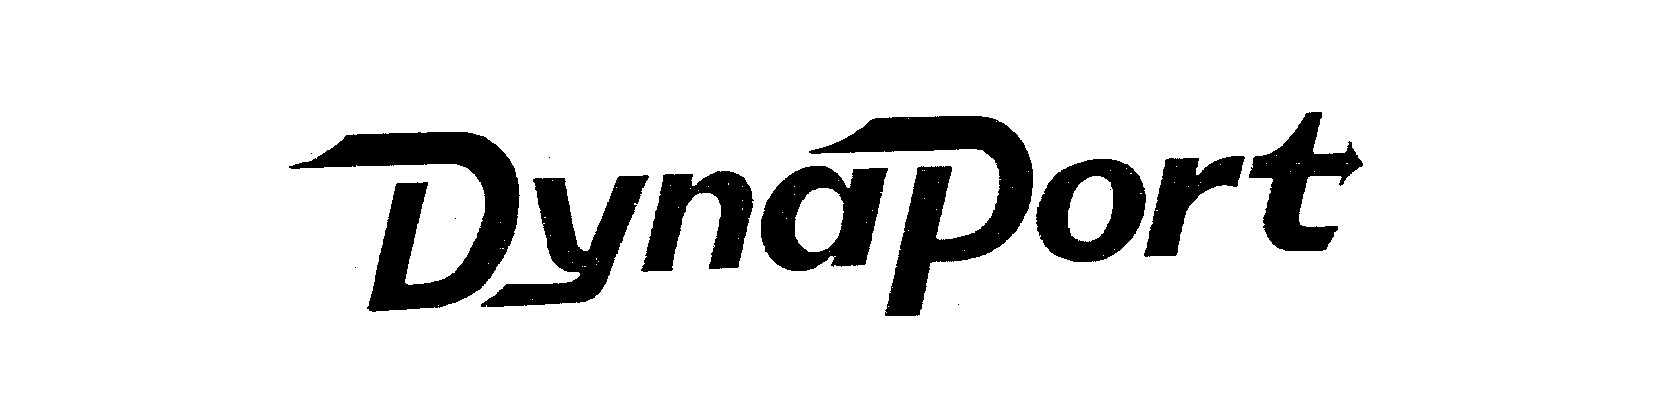 DYNAPORT